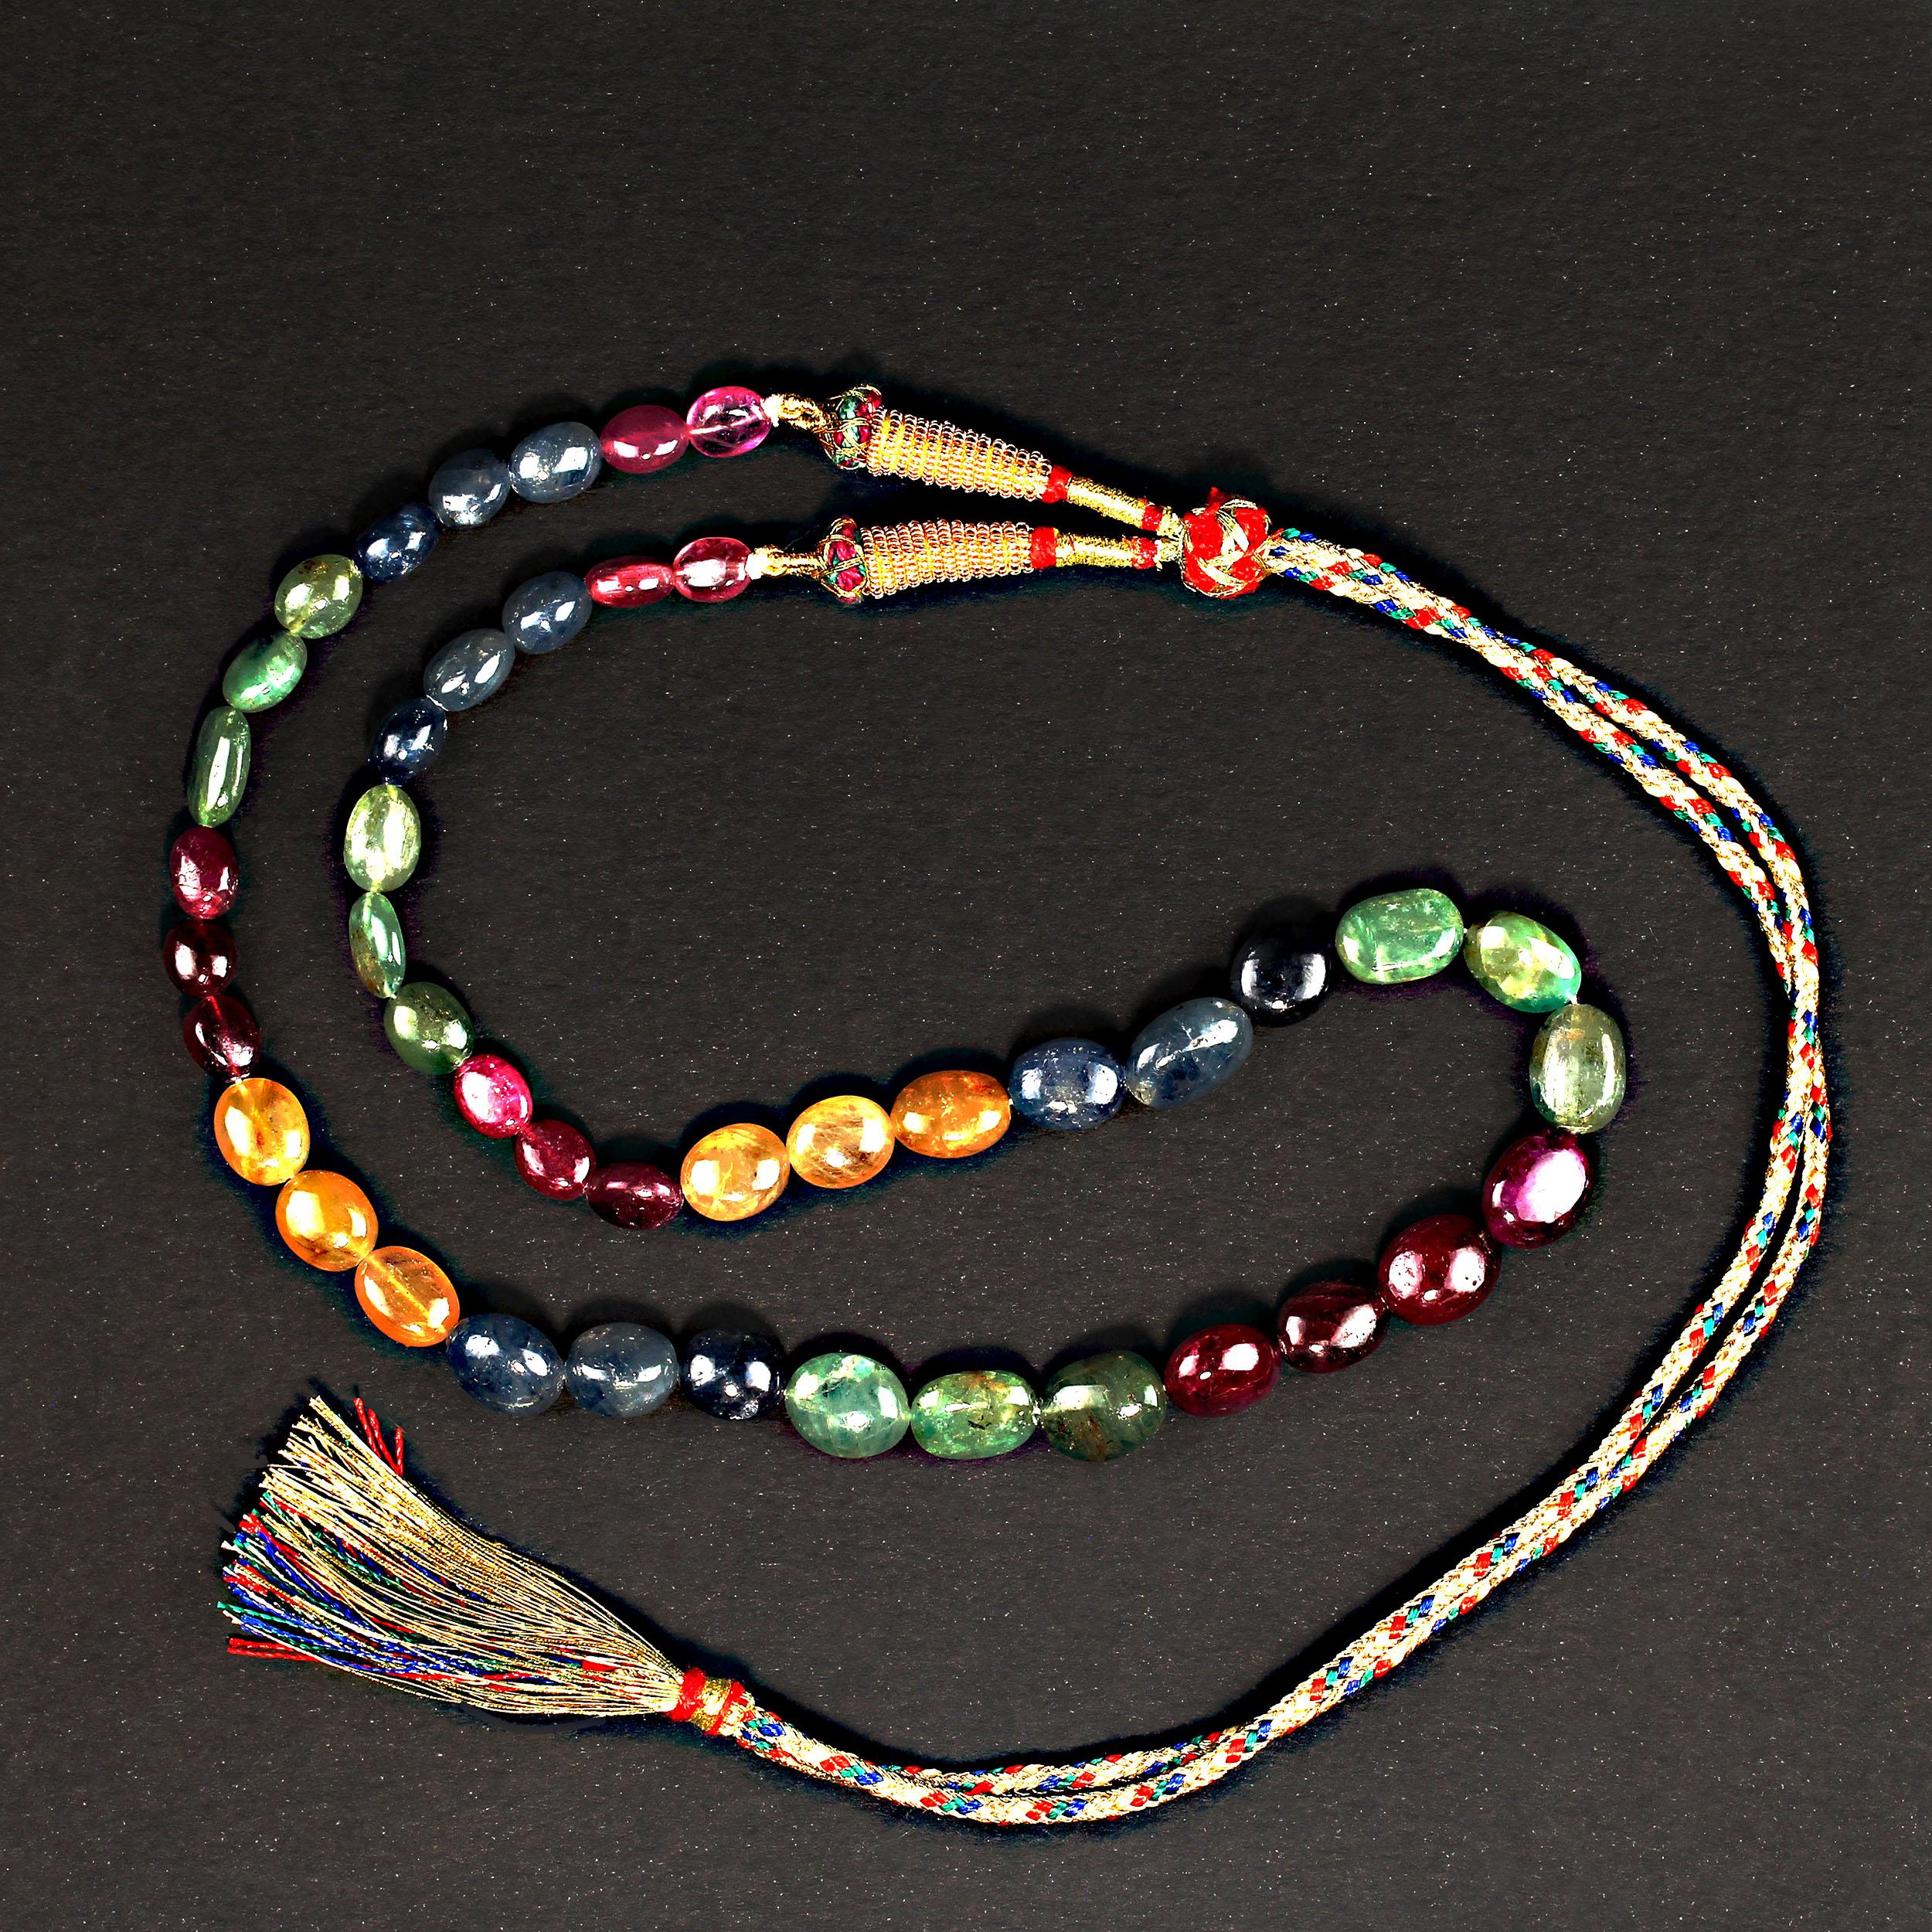 Artisan AJD 19 Inch Multi Color Beaded Sapphire Necklace   Great Gift! For Sale